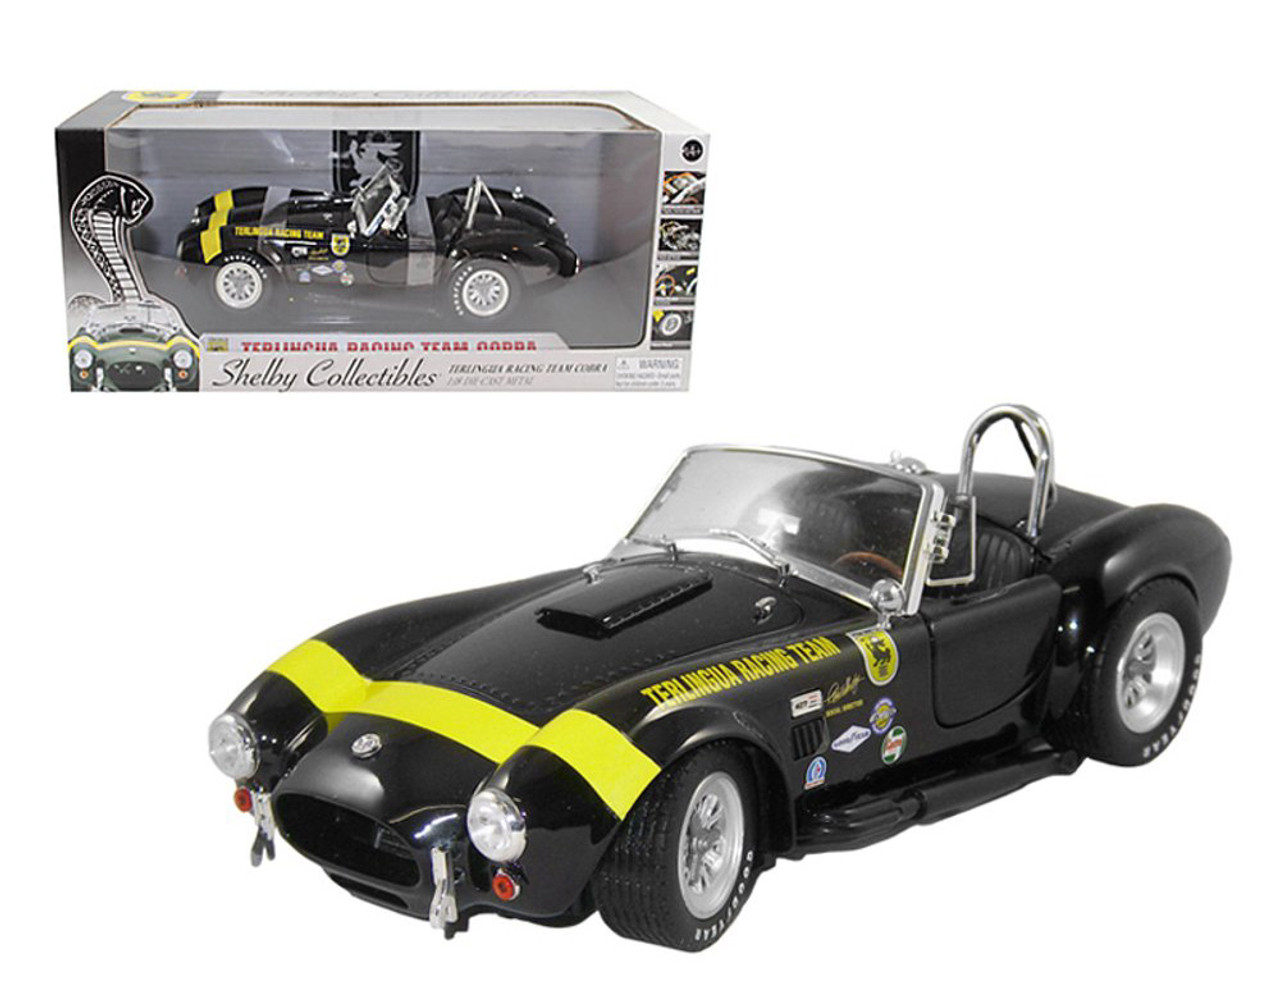 1/18 Shelby Collectibles 1965 Shelby Cobra 427 S/C Terlingua Racing Team Black Diecast Car Model